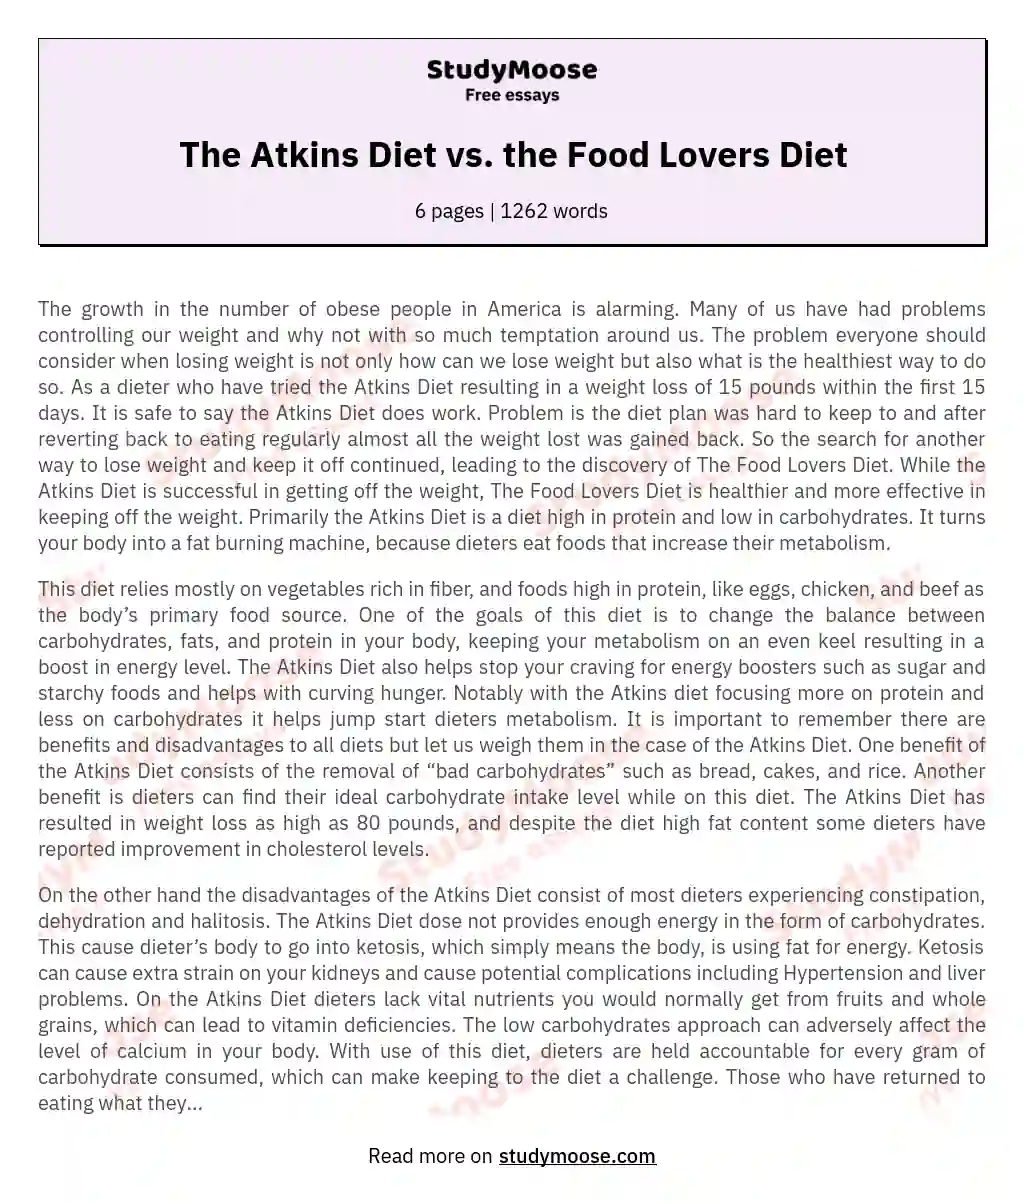 The Atkins Diet vs. the Food Lovers Diet essay